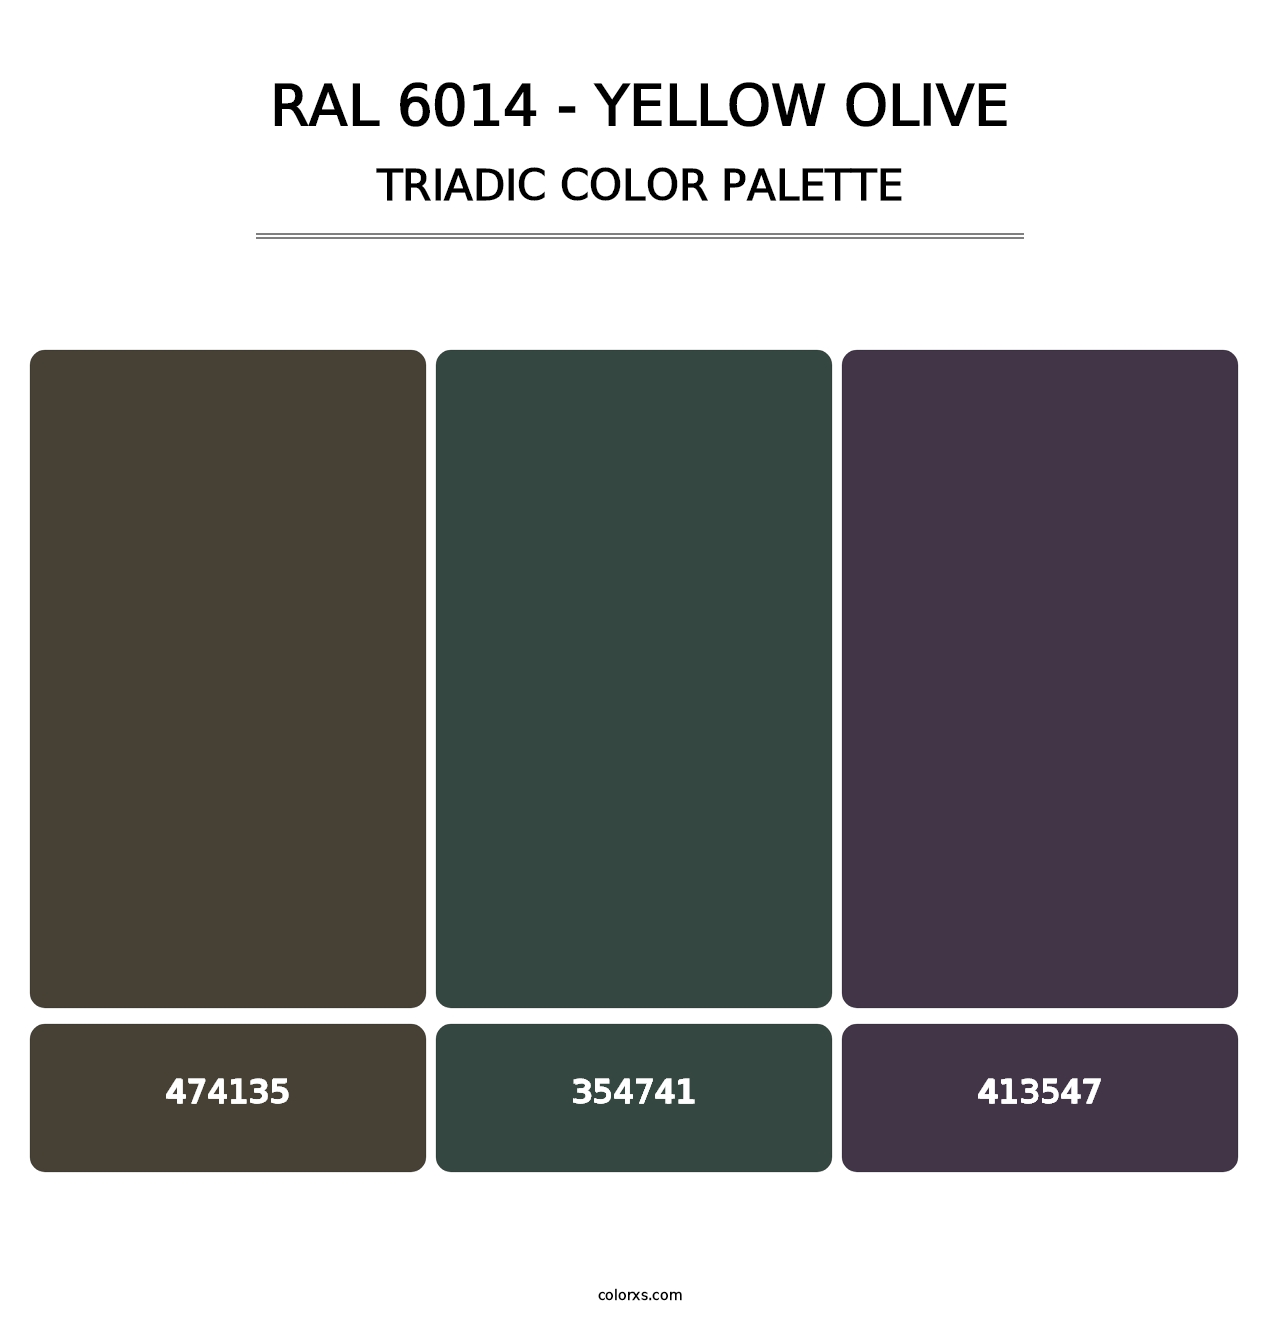 RAL 6014 - Yellow Olive - Triadic Color Palette